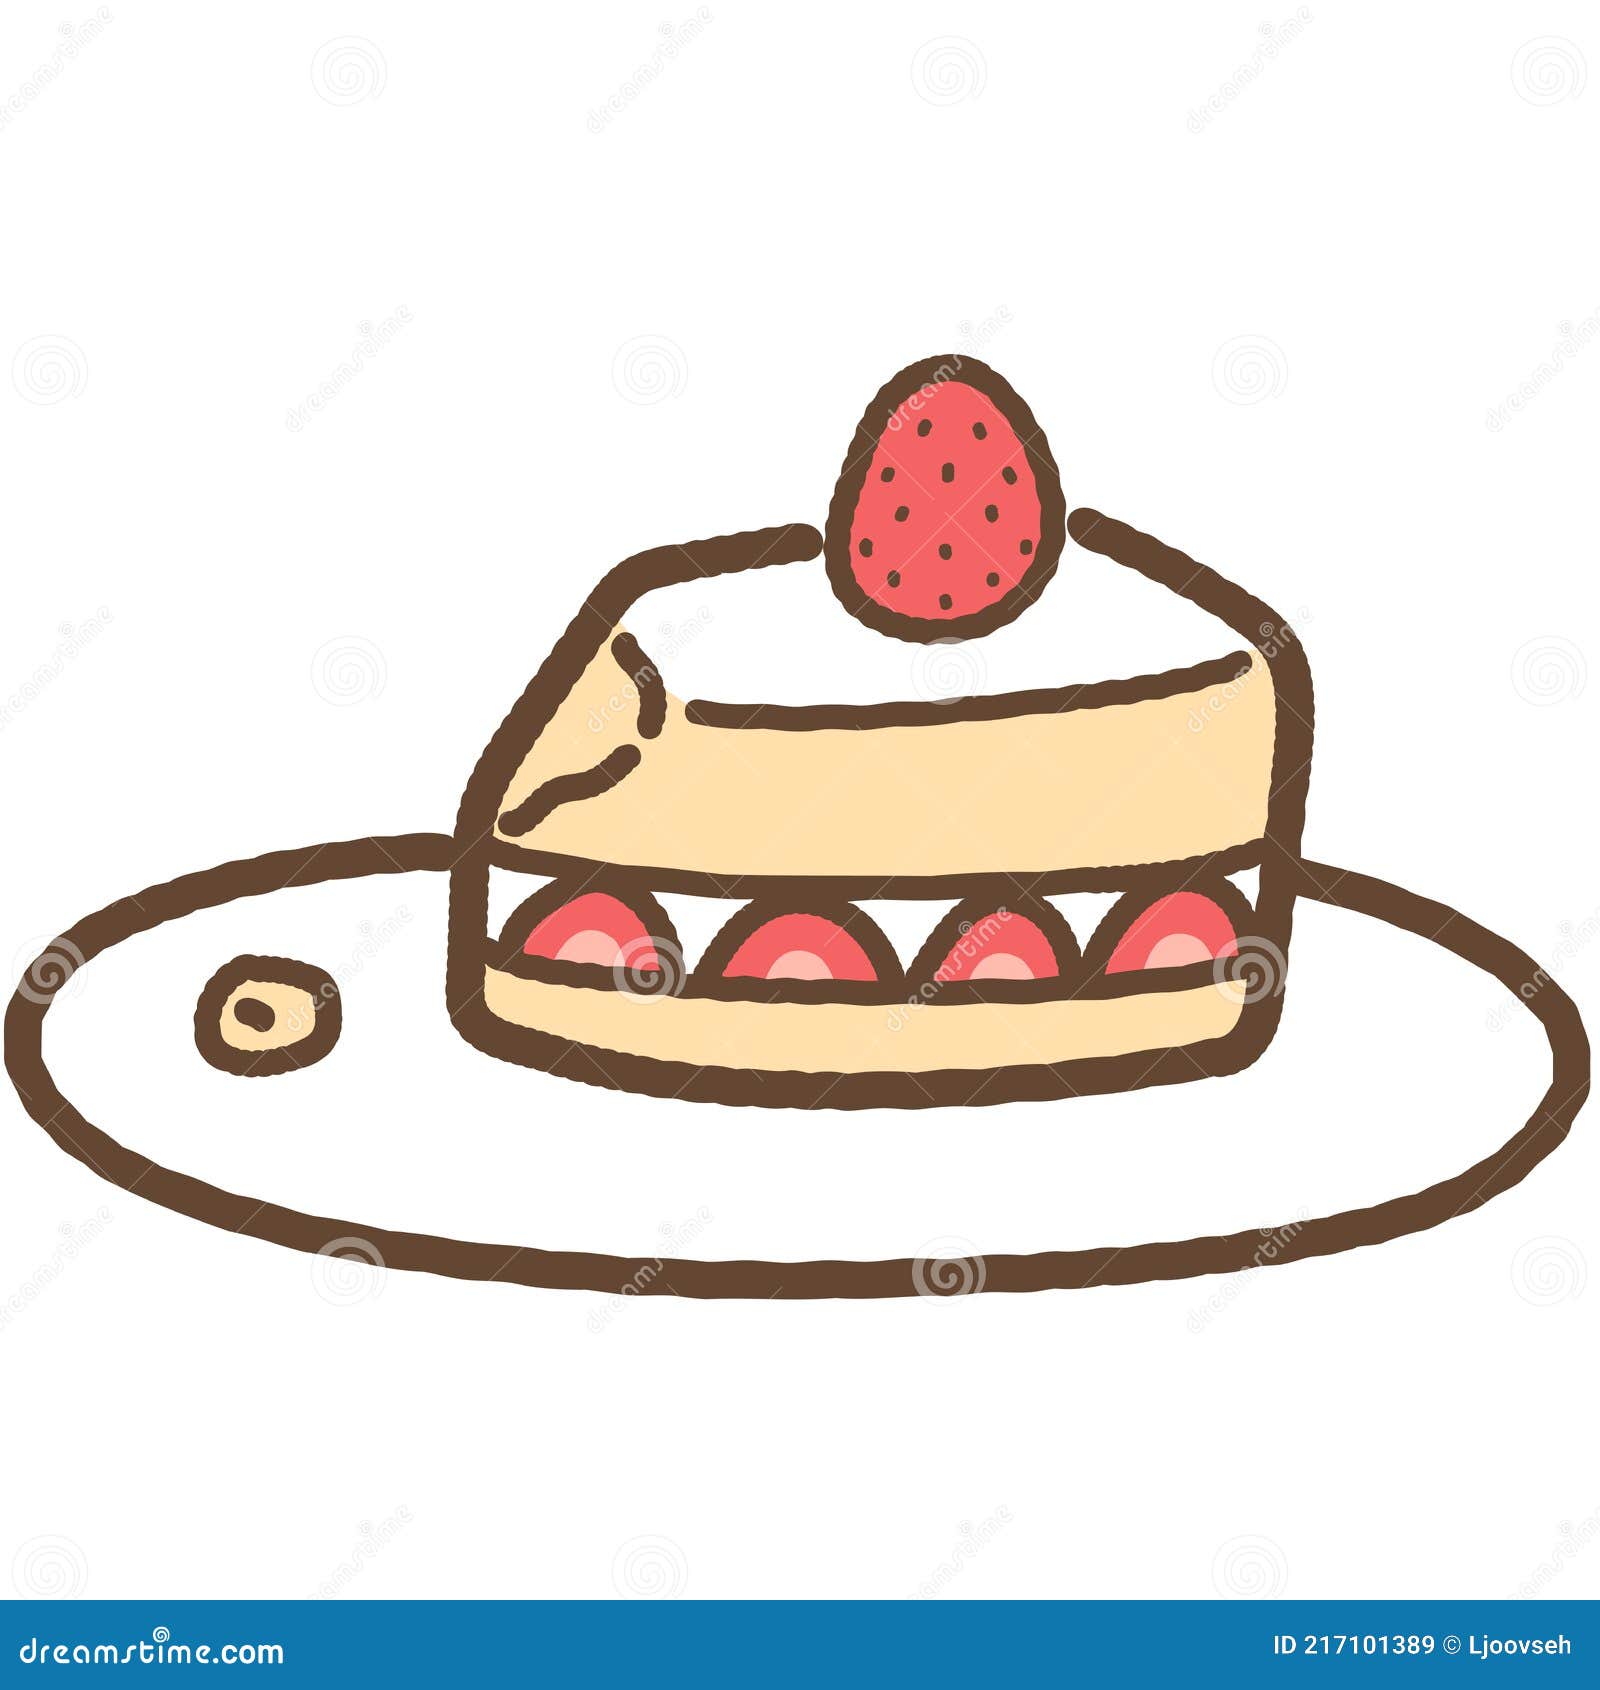 Simple and Cute Hand Drawn Strawberry Shortcake Outlined Stock Vector -  Illustration of slice, homemade: 217101389